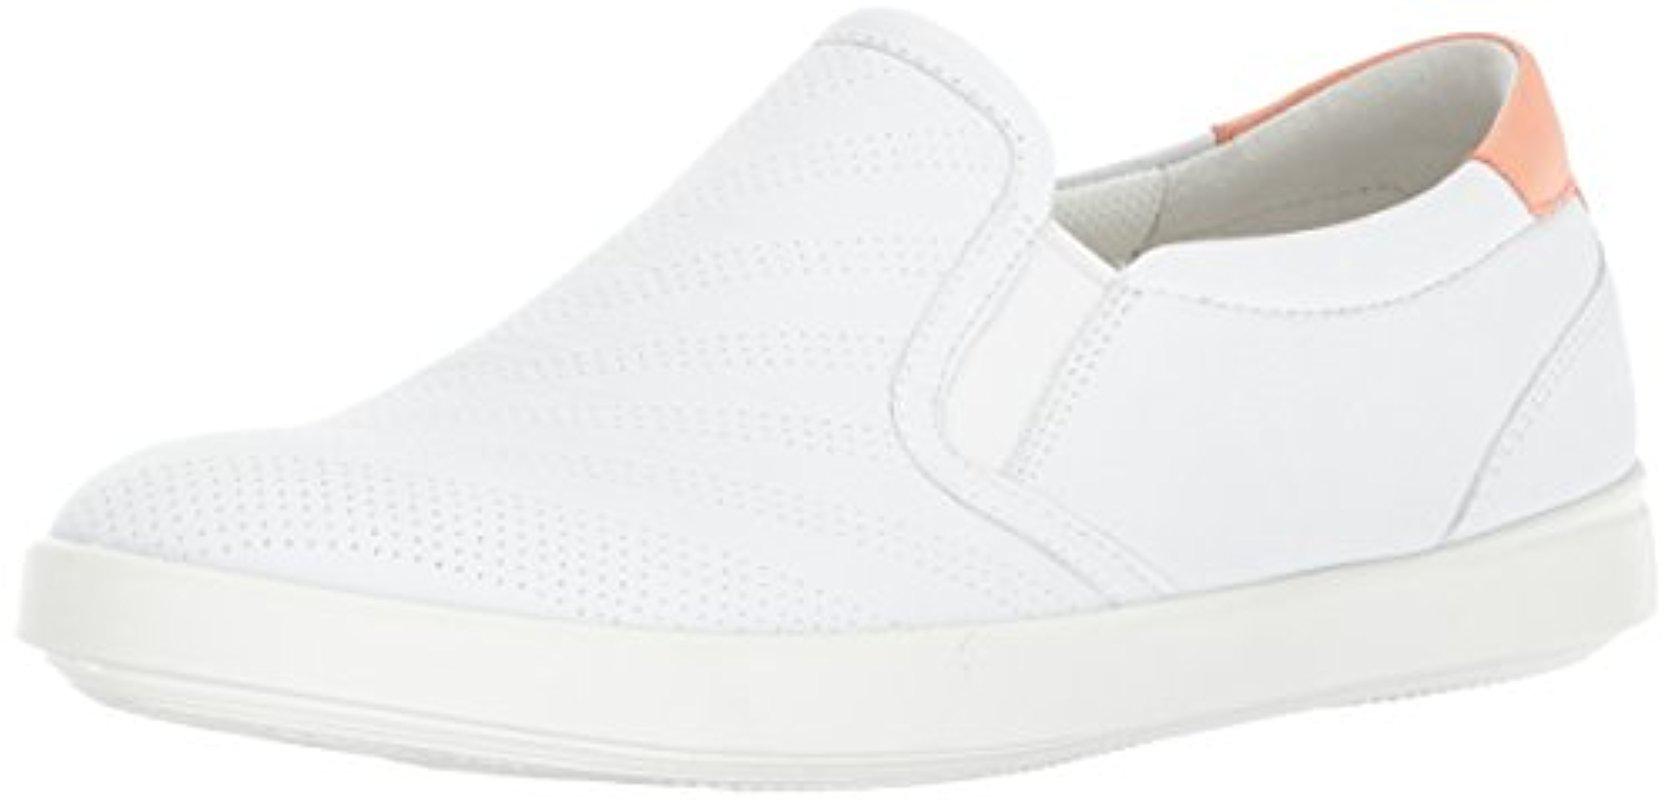 ecco perforated slip on